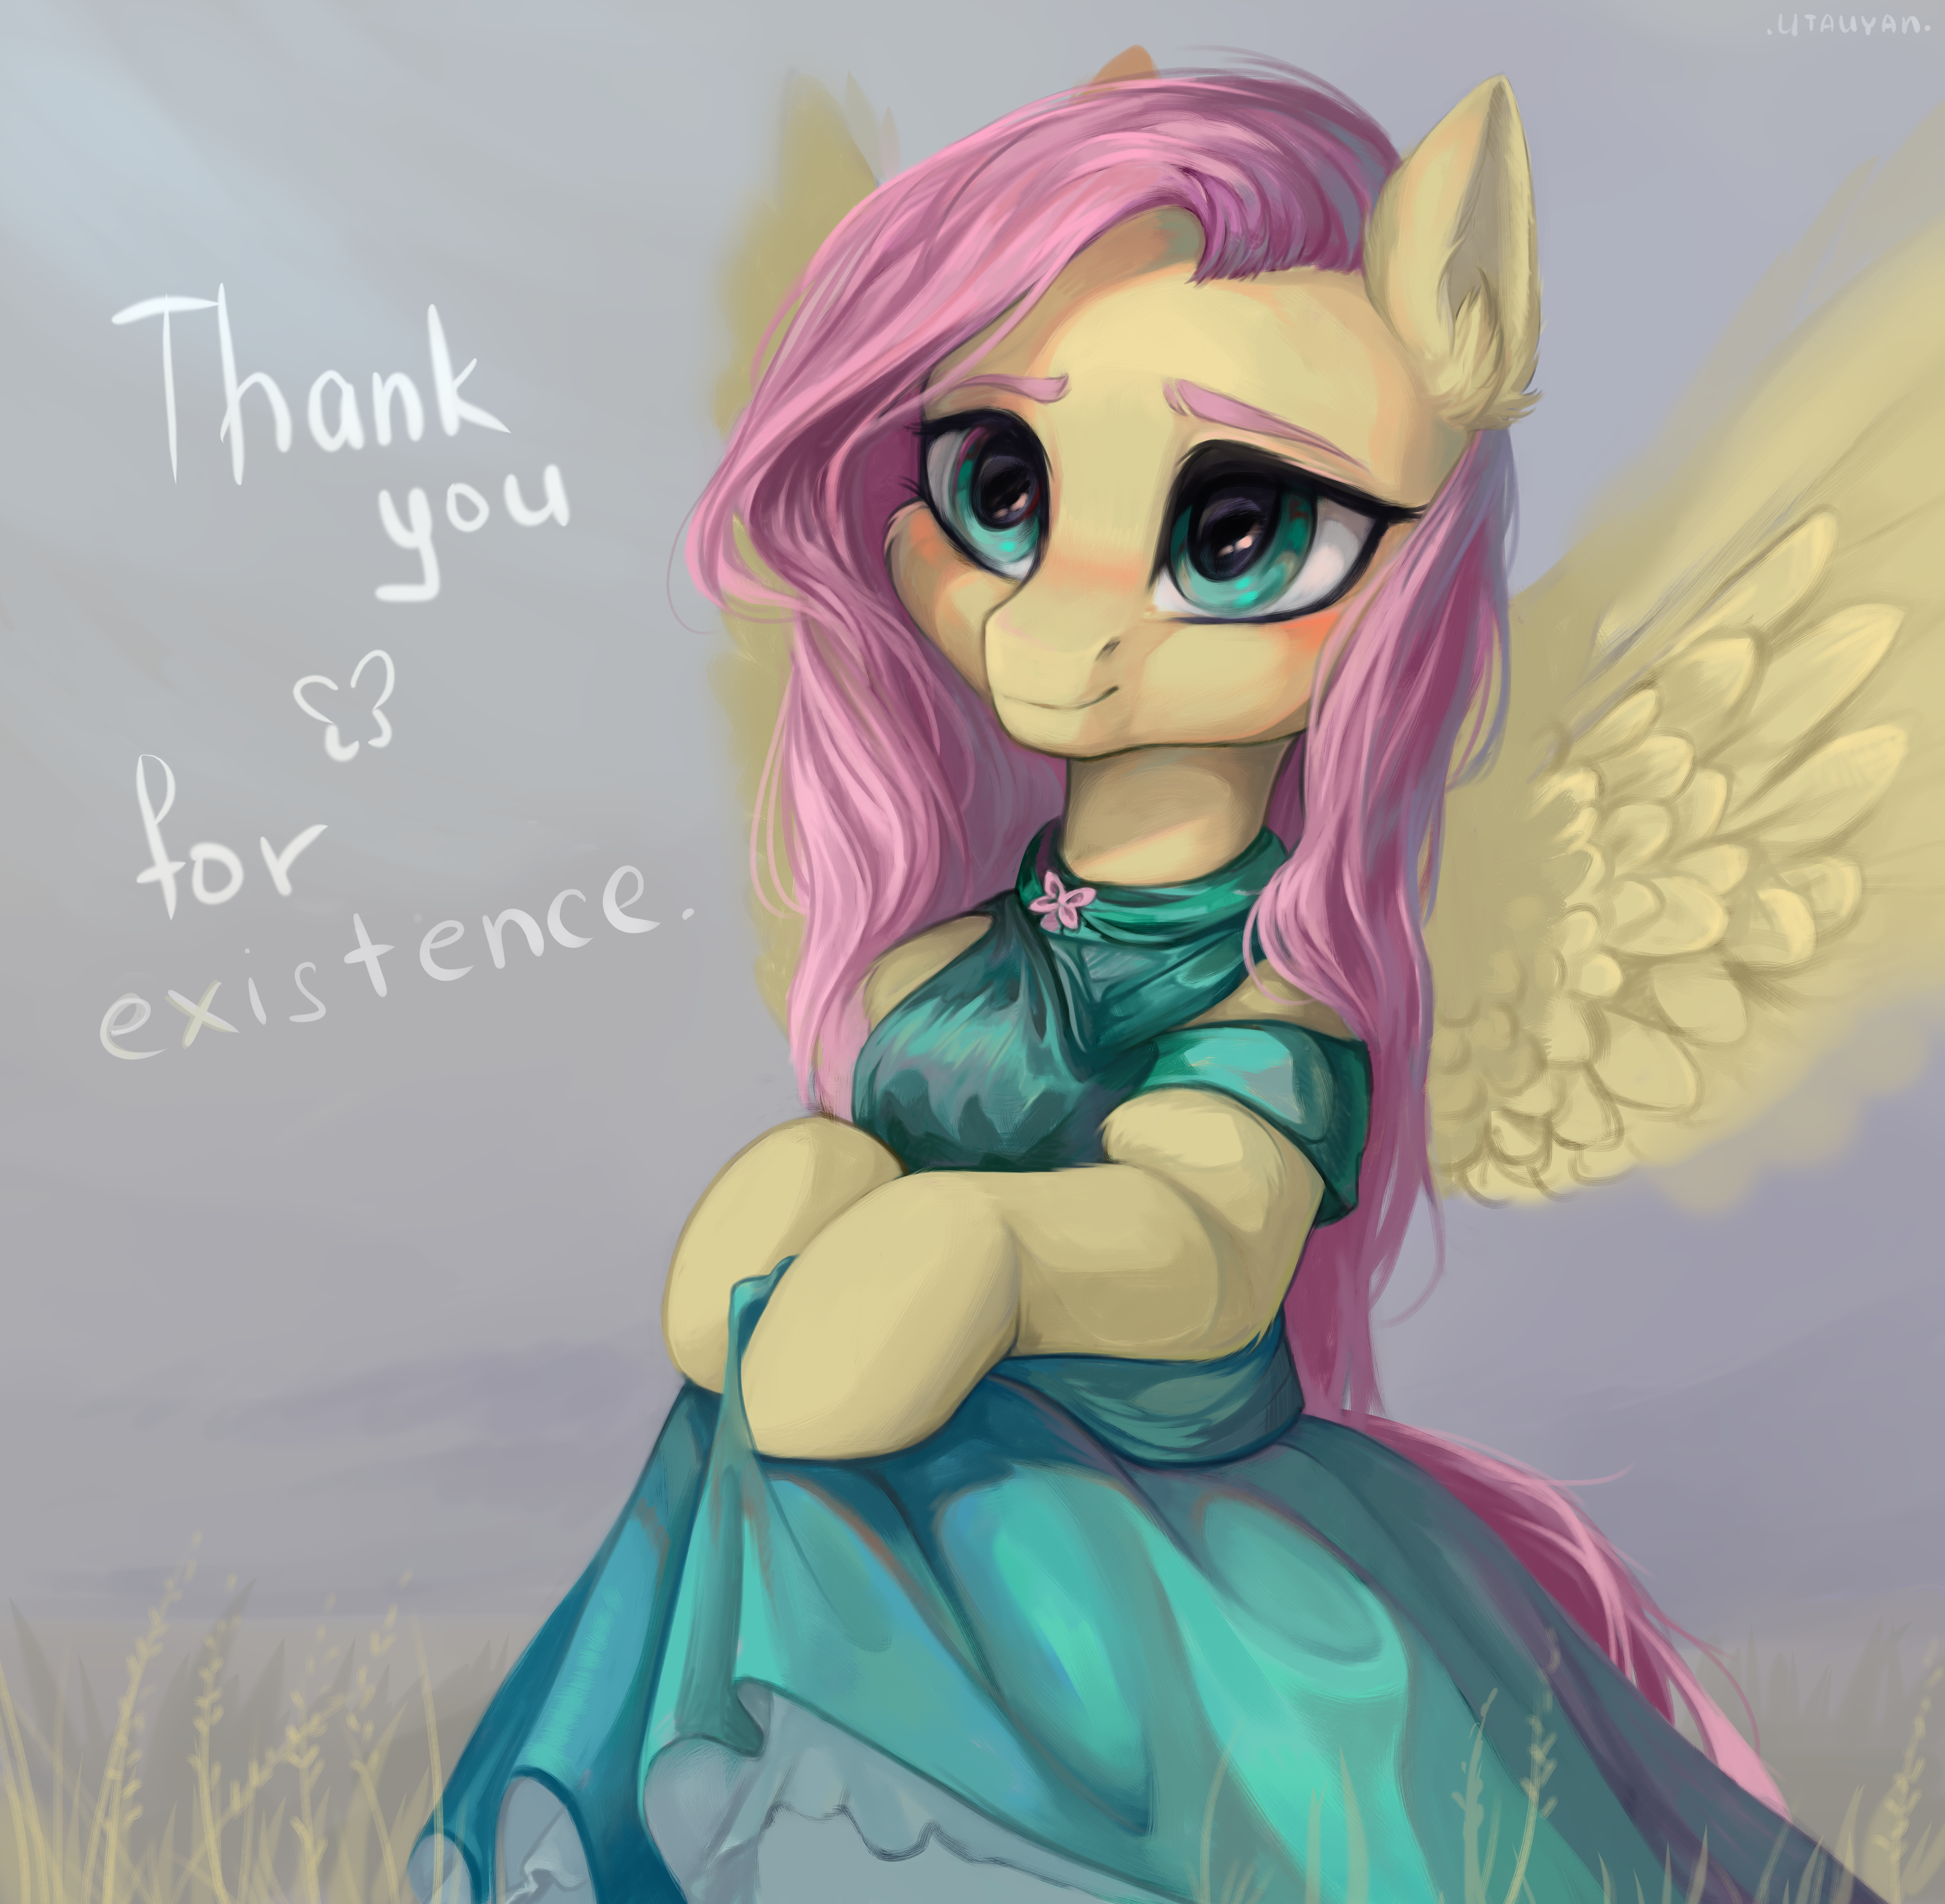 [Obrázek: thank_you_for_existence_by_utauyan-dc356nw.png]